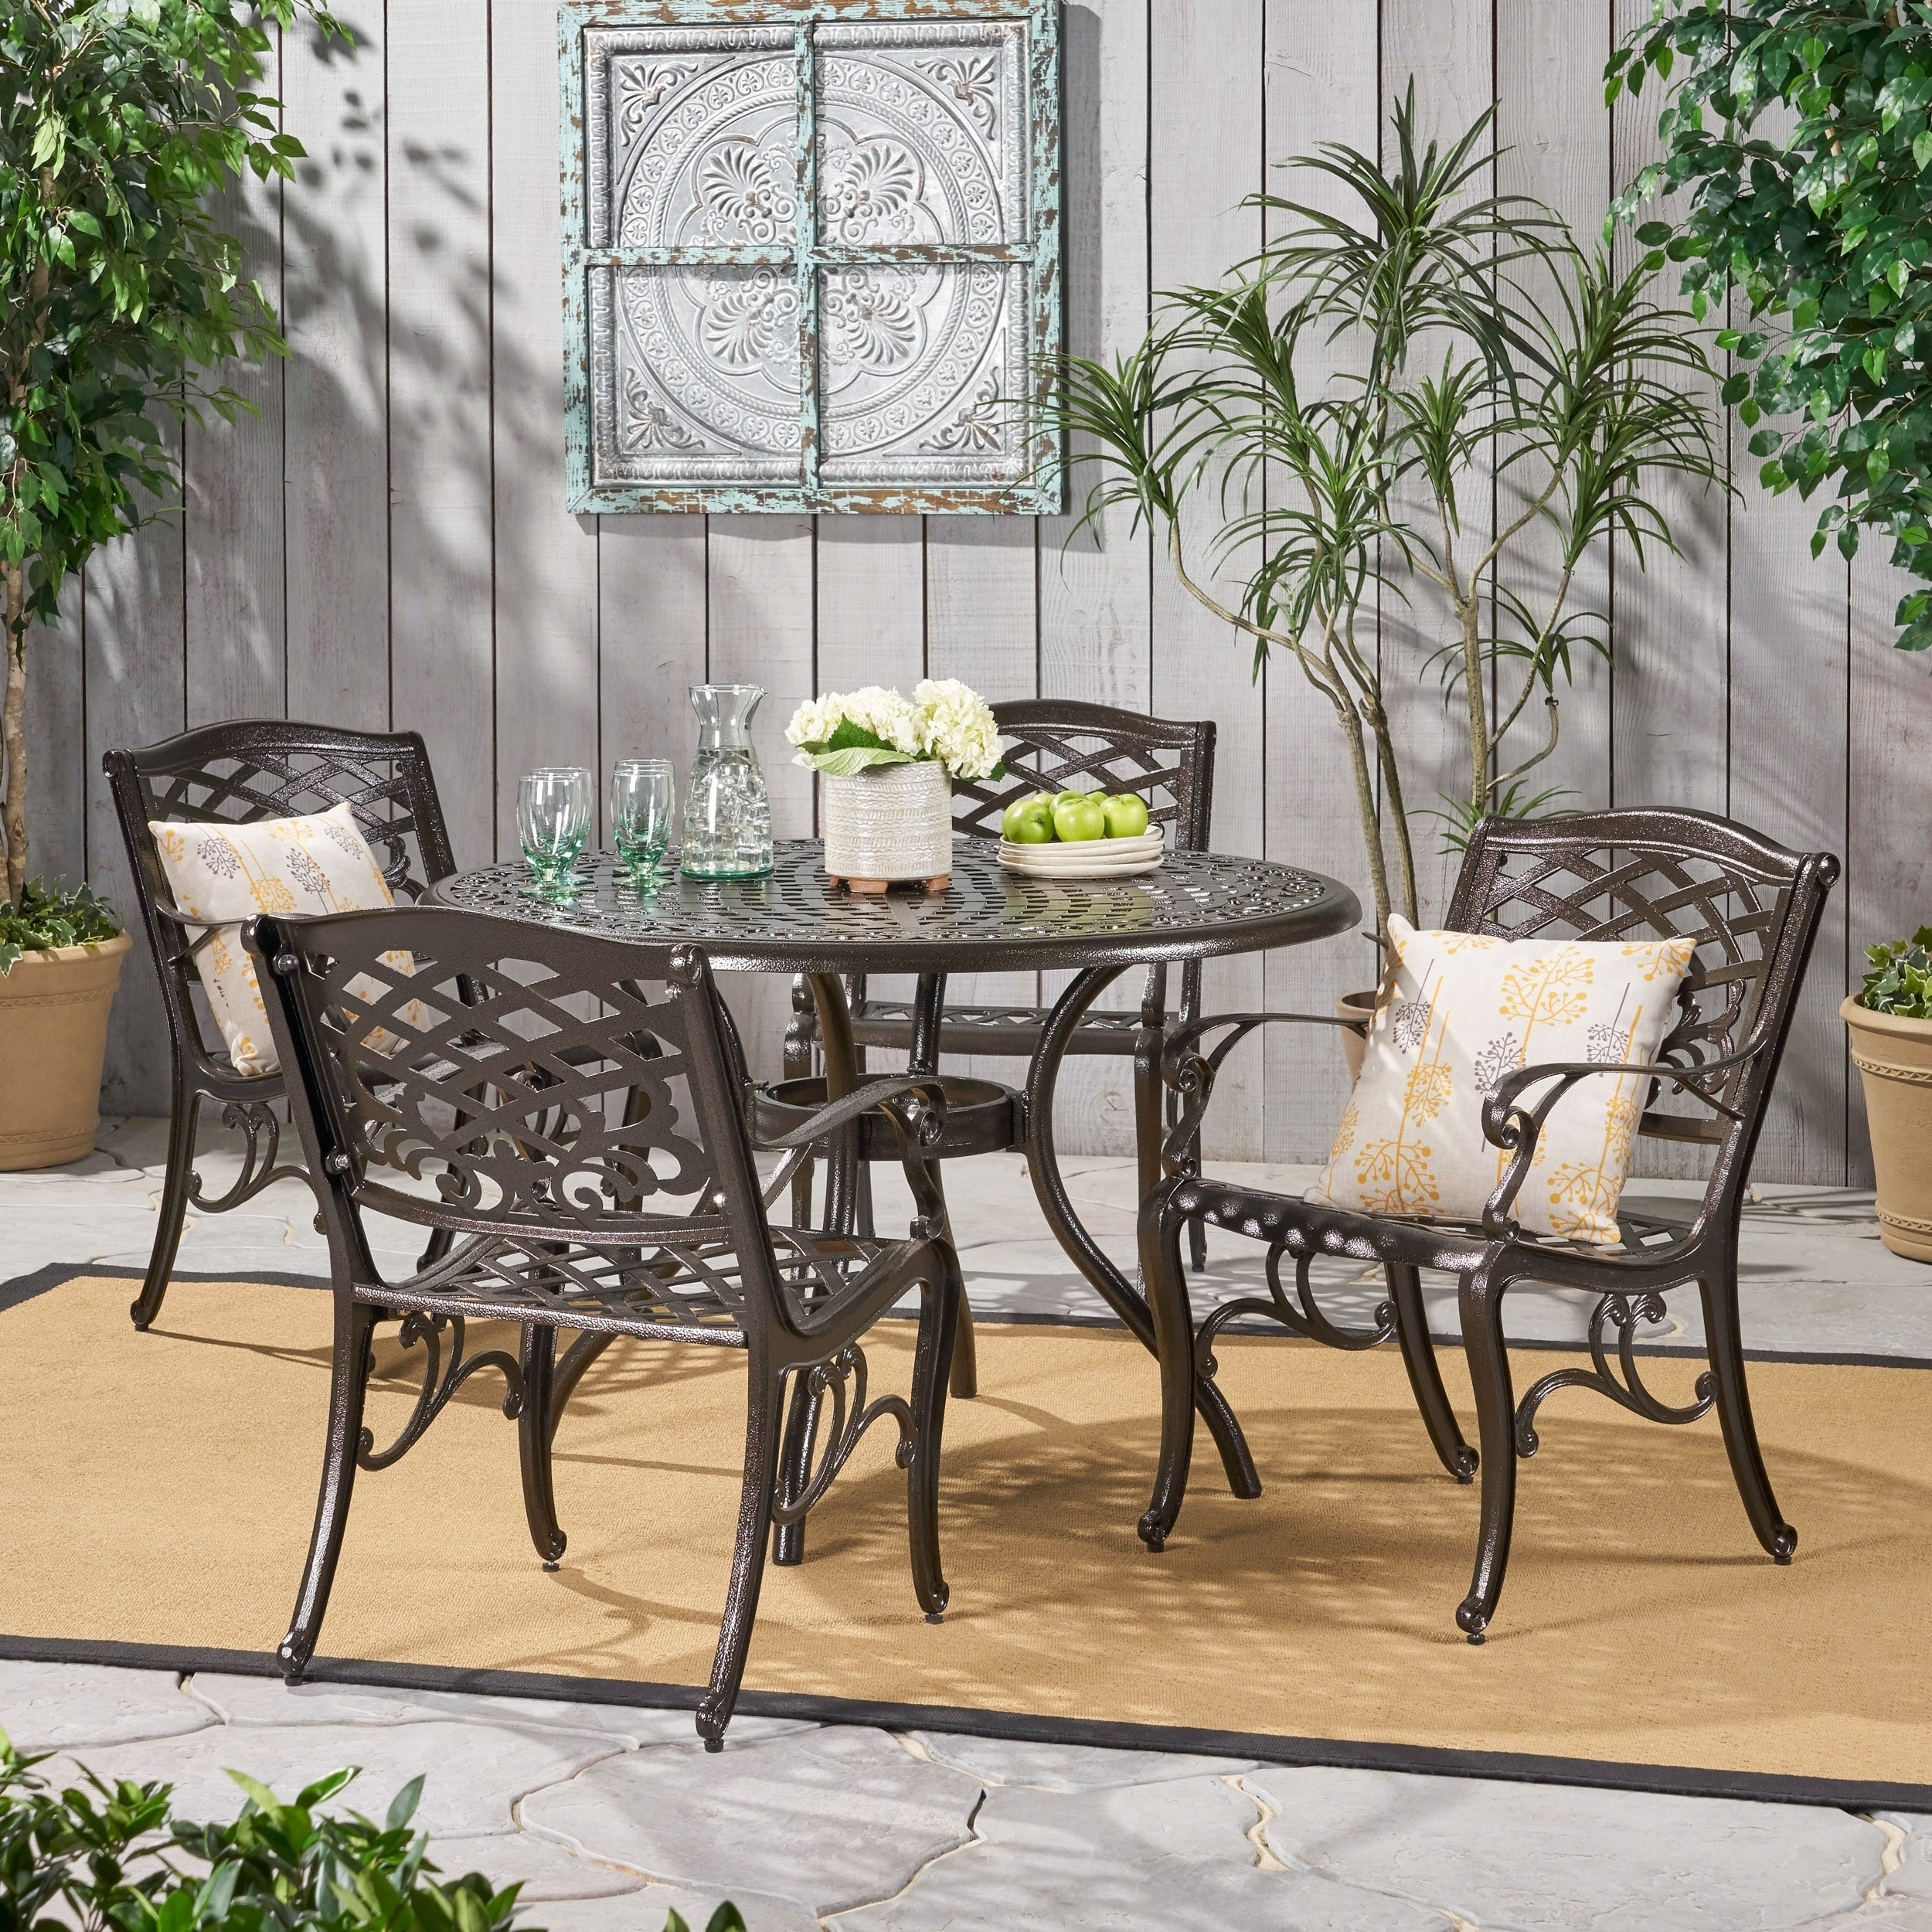 Christopher Knight Home Hallandale Sarasota 5 piece Cast Aluminum Bronze Outdoor Dining Set (BronzeFeatures mesh chairs and round table topSome assembly requiredSturdy constructionNeutral colors to match any outdoor decorIdeal for entertaining guests outd